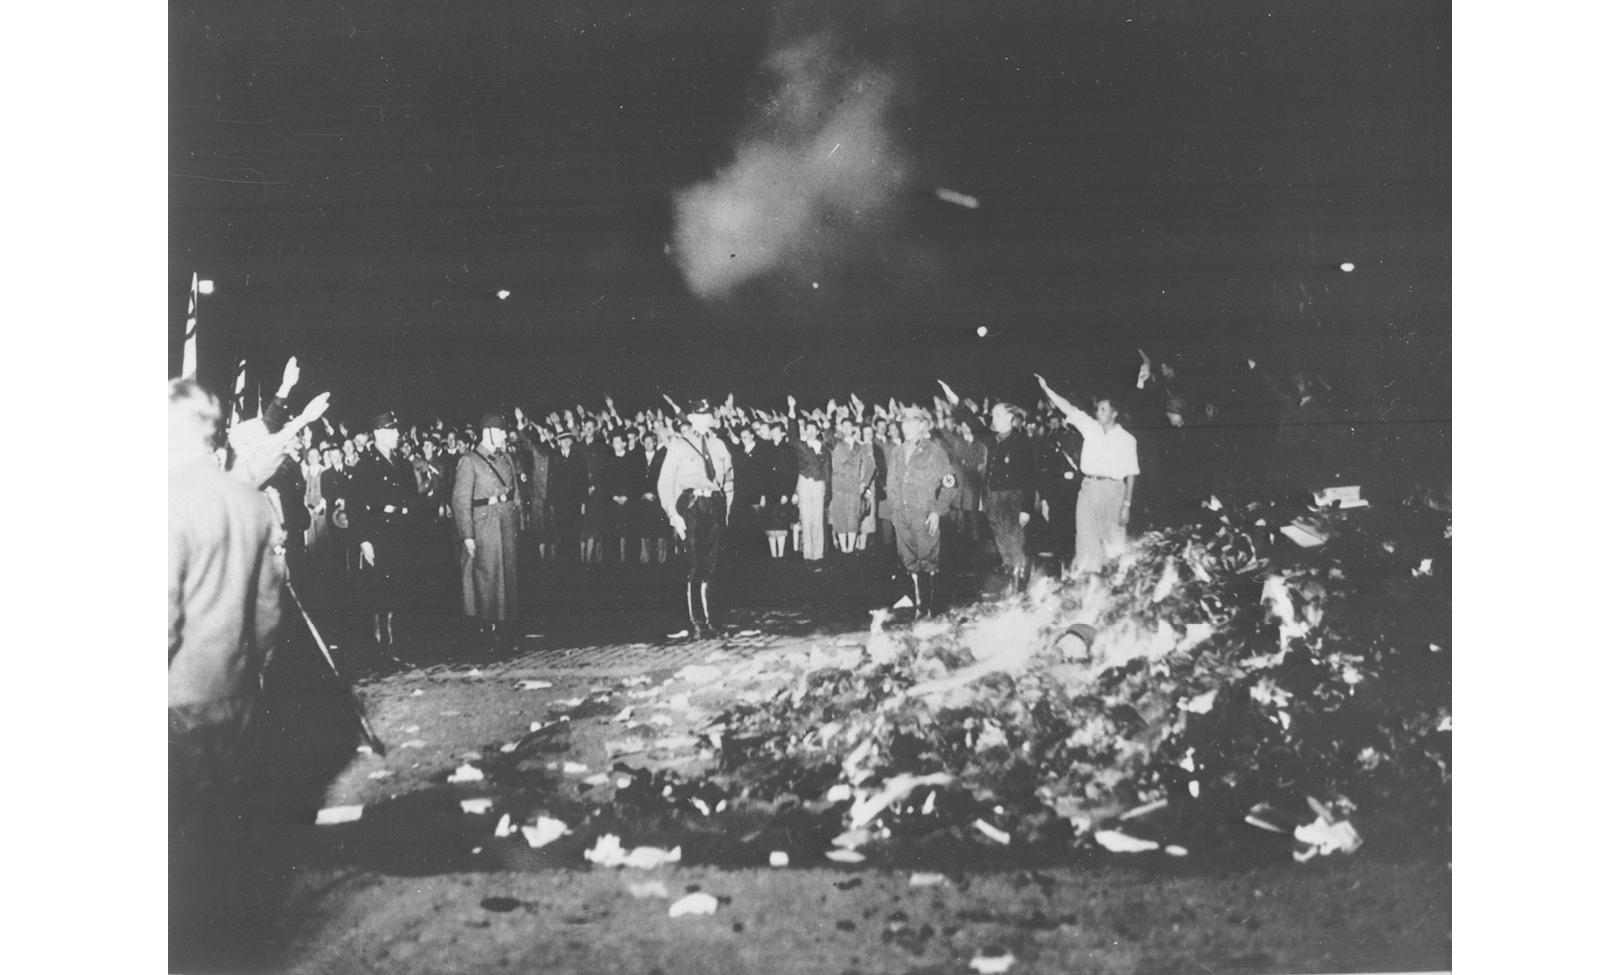 A black and white photograph from 1933 Berlin: captures a book burning by students on Berlin’s Opernplatz; a large crowd of students circle a pile of burning books while holding the Nazi salute; in the background, white smoke emanating from the pile rises against the night sky.